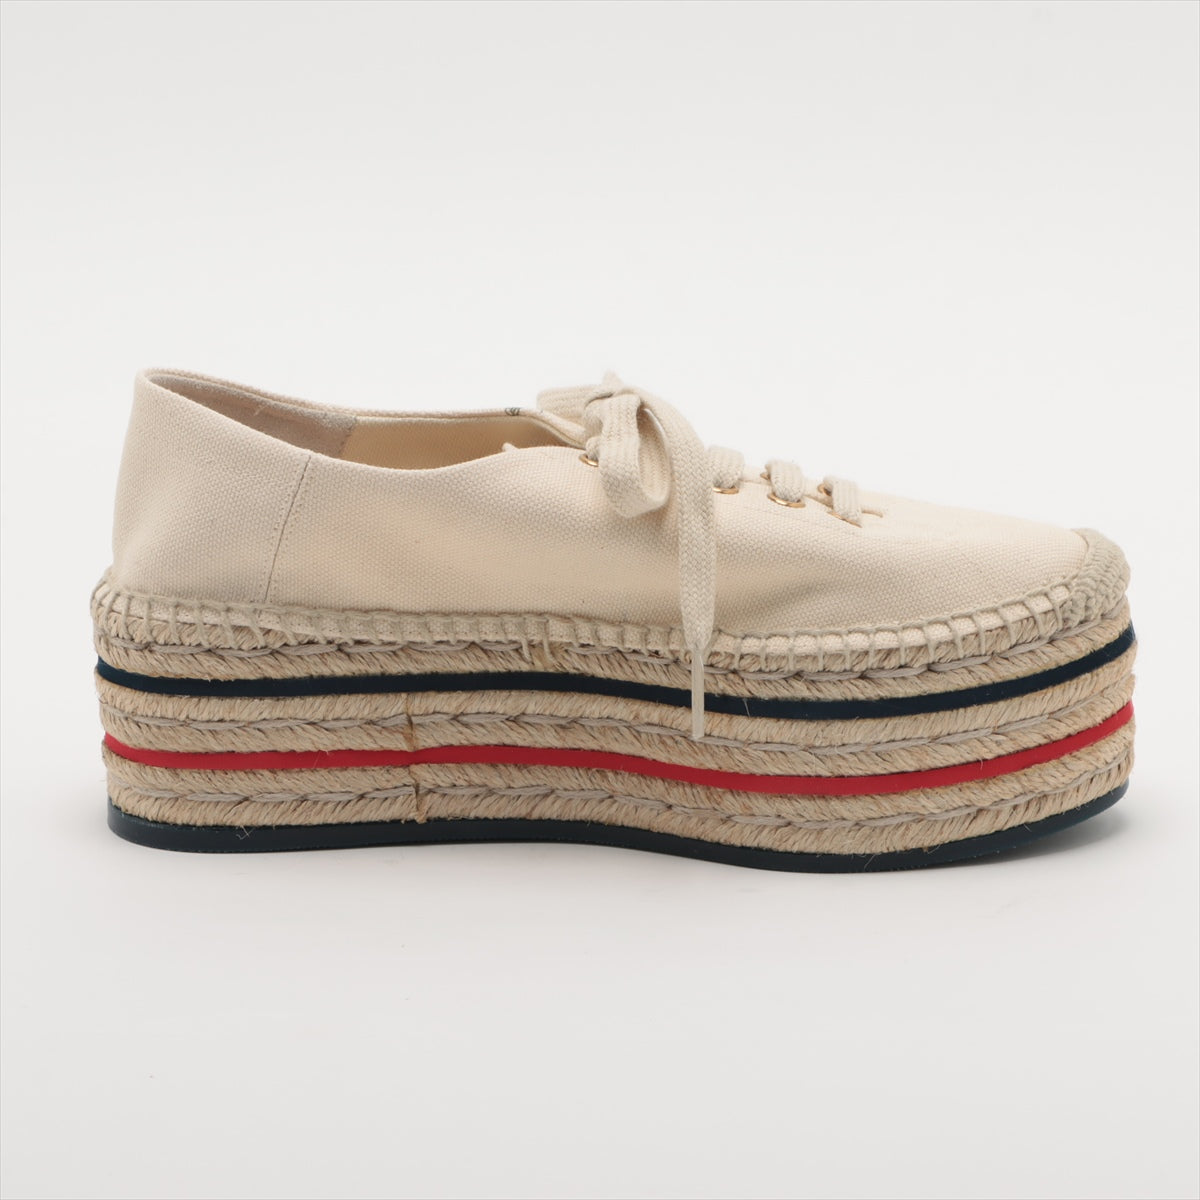 Gucci canvas Sneakers 36.5 Ladies' Ivory 525711 Sherry Line Espadrilles Thick bottom